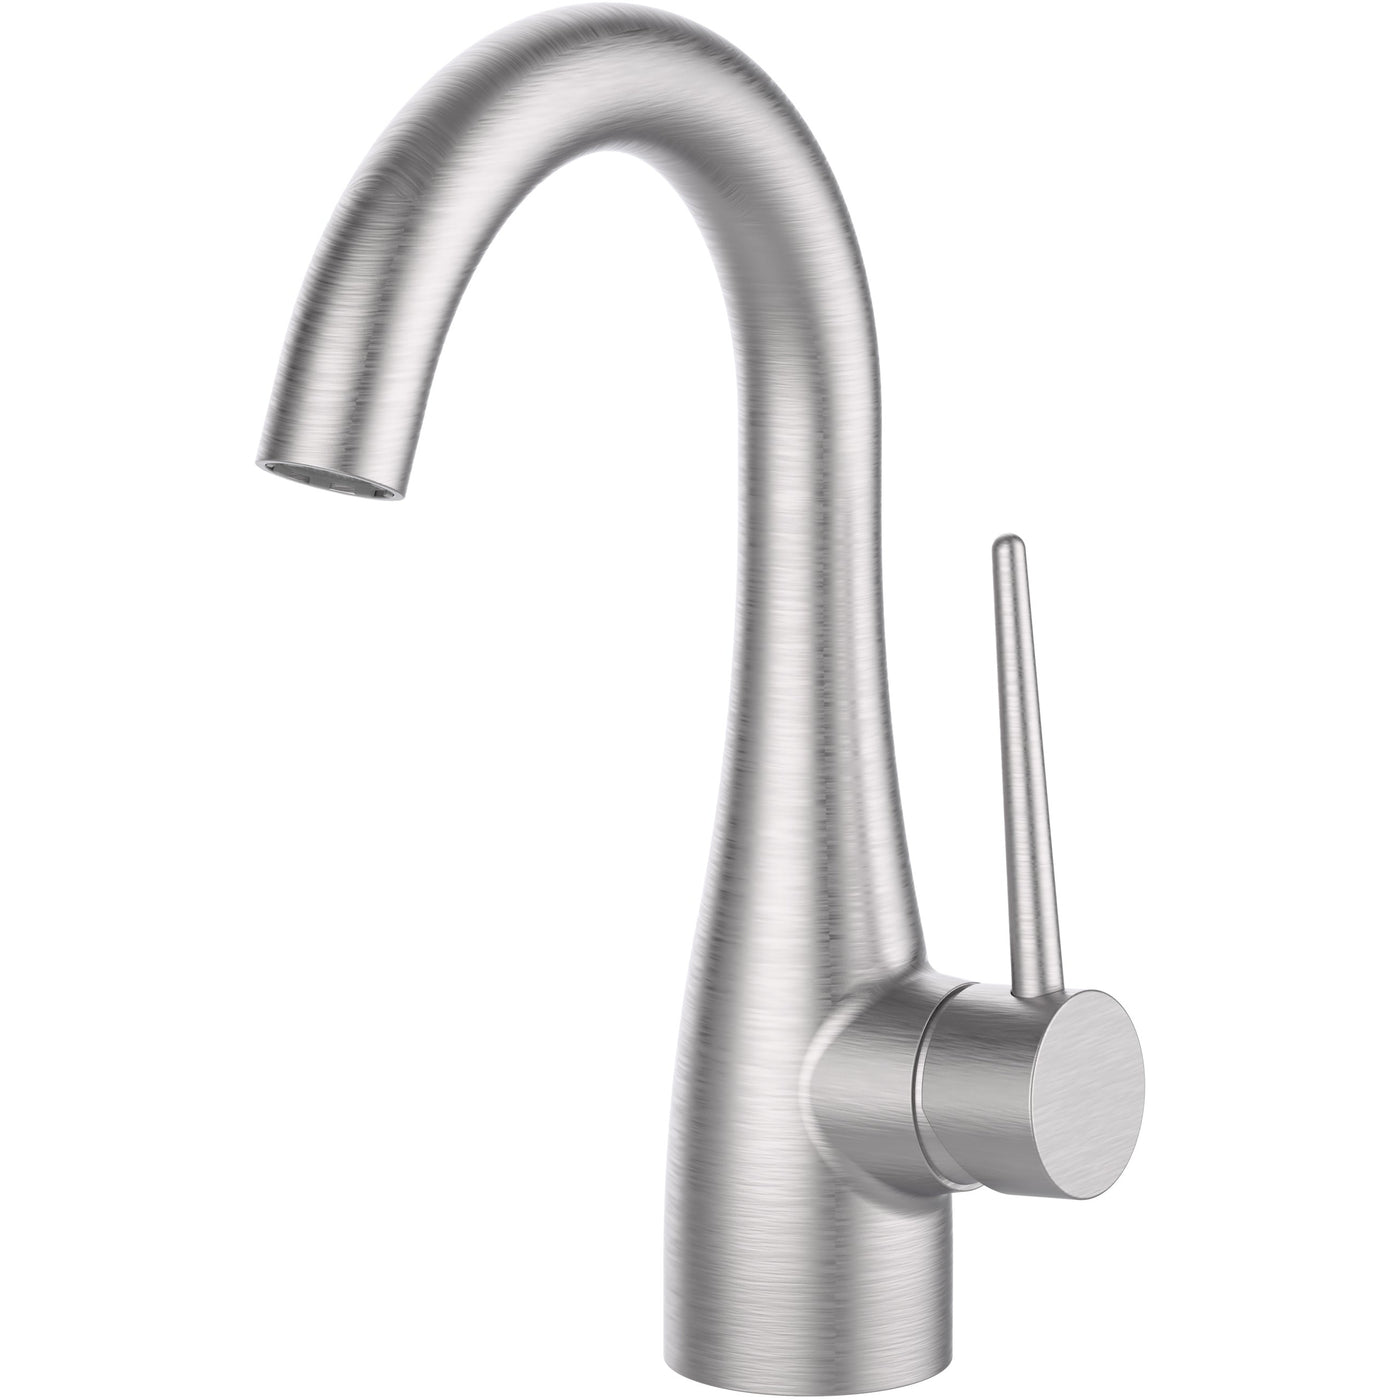 Eden, tall brushed nickel basin mixer tap with swivel spout